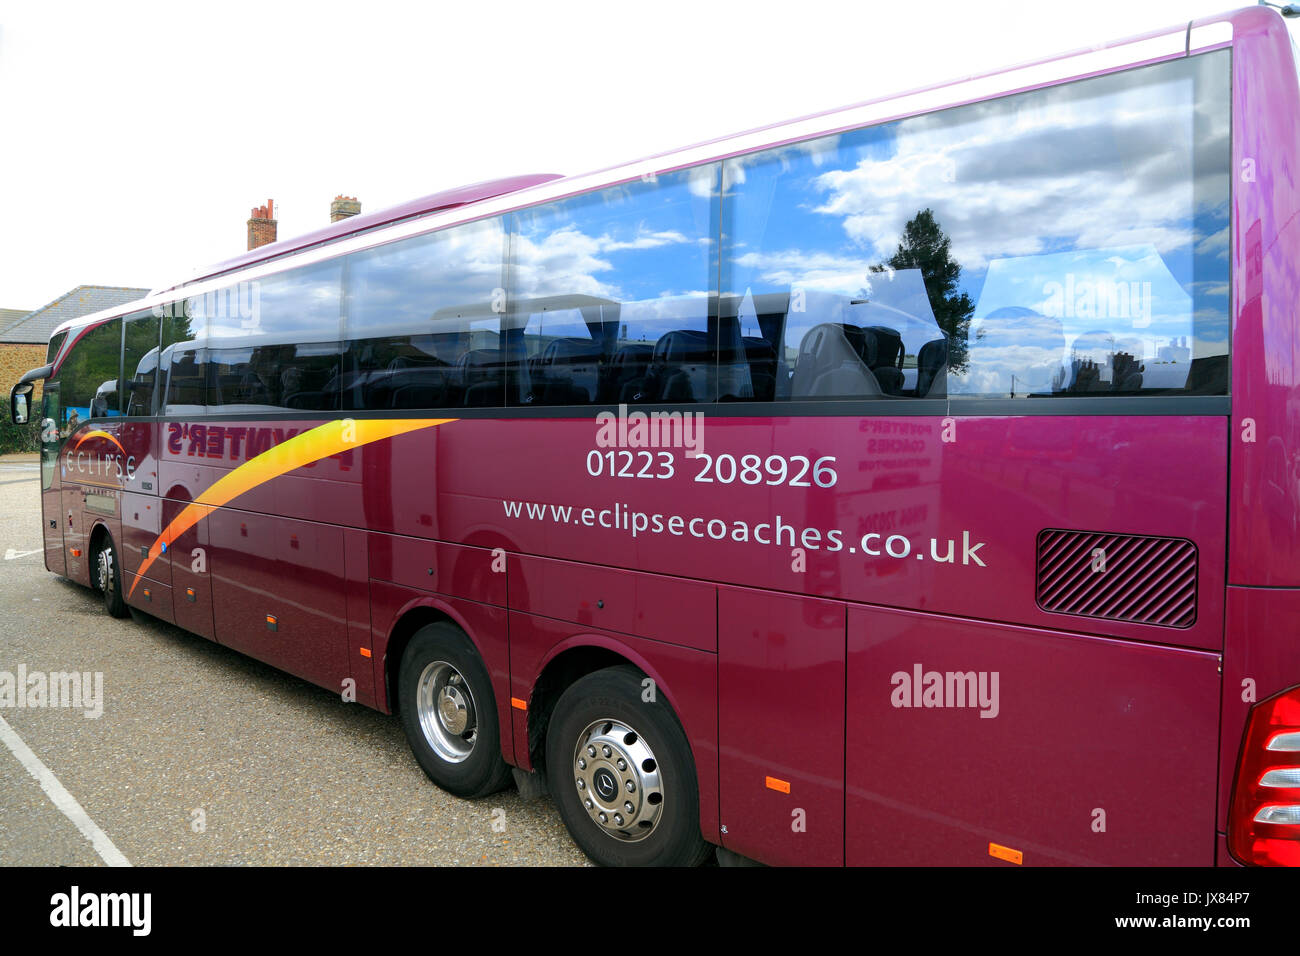 Eclipse Coaches, coach, day trips, trips, excursion, excursions, holidays, transport, travel company, companies, England, UK Stock Photo